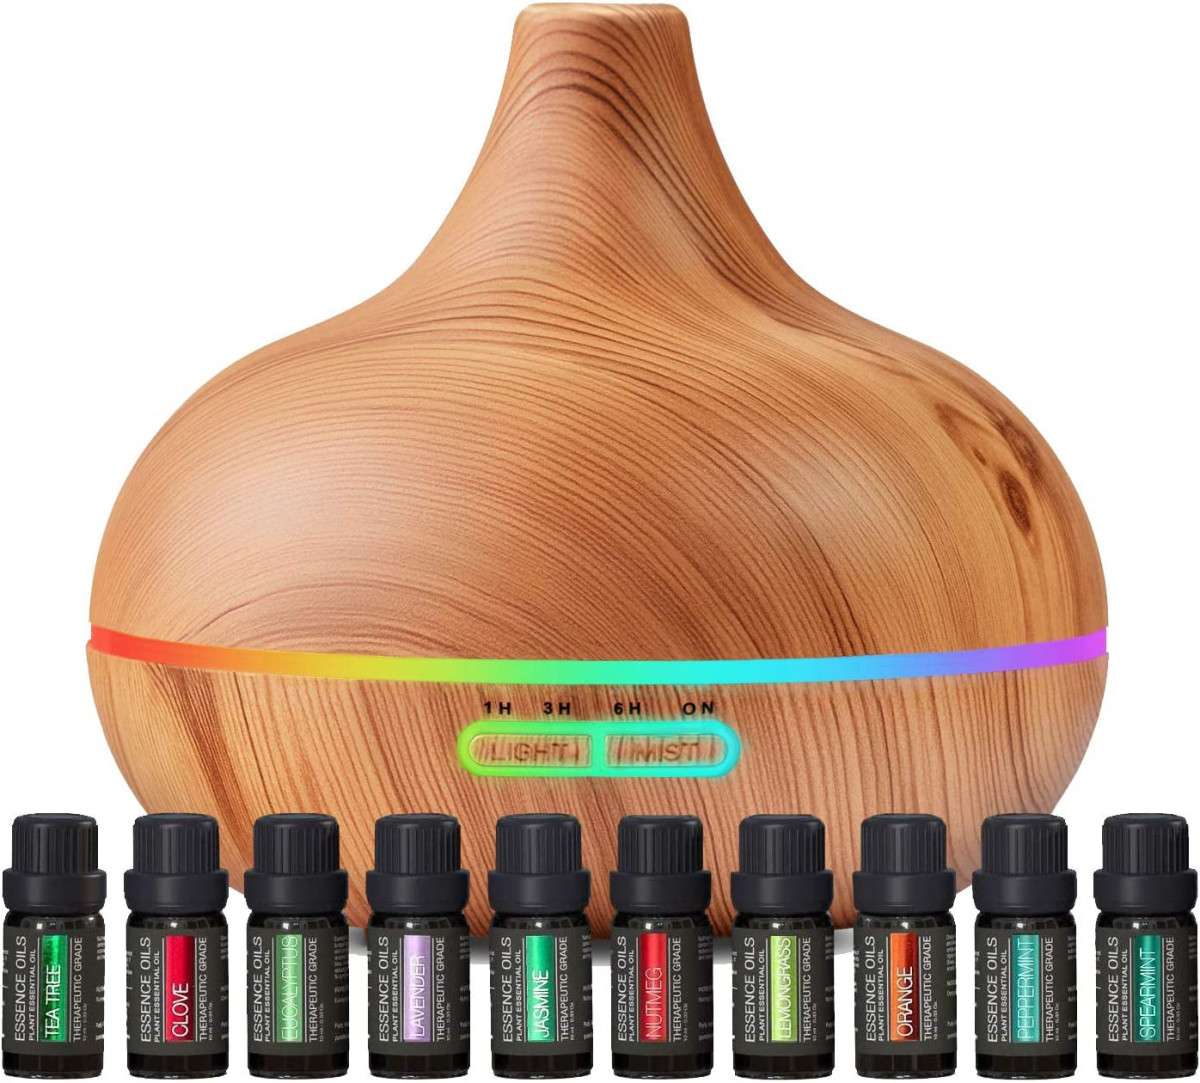 Alea's Deals 51% Off Ultimate Aromatherapy Diffuser & Essential Oil Set! Was $69.95!  